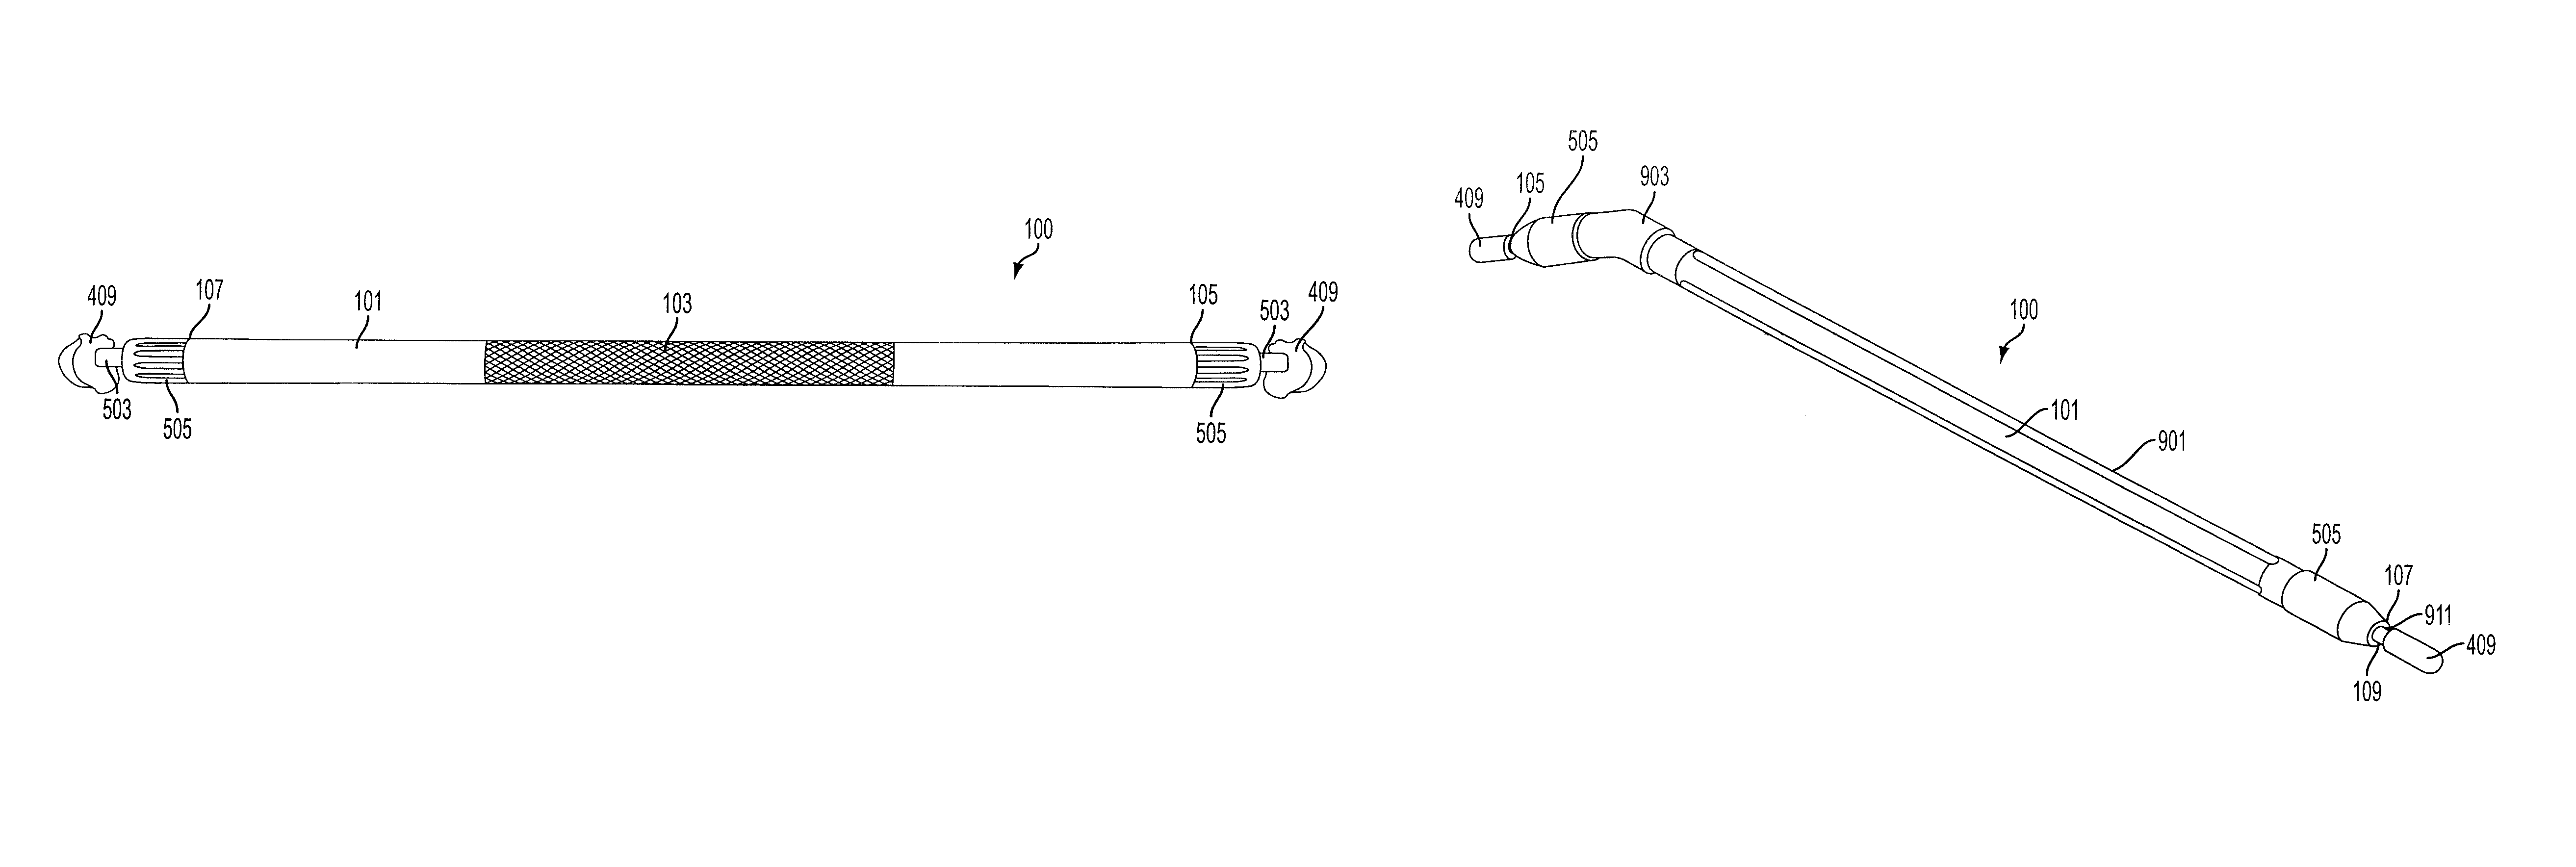 Blunt dissection and tissue elevation instrument